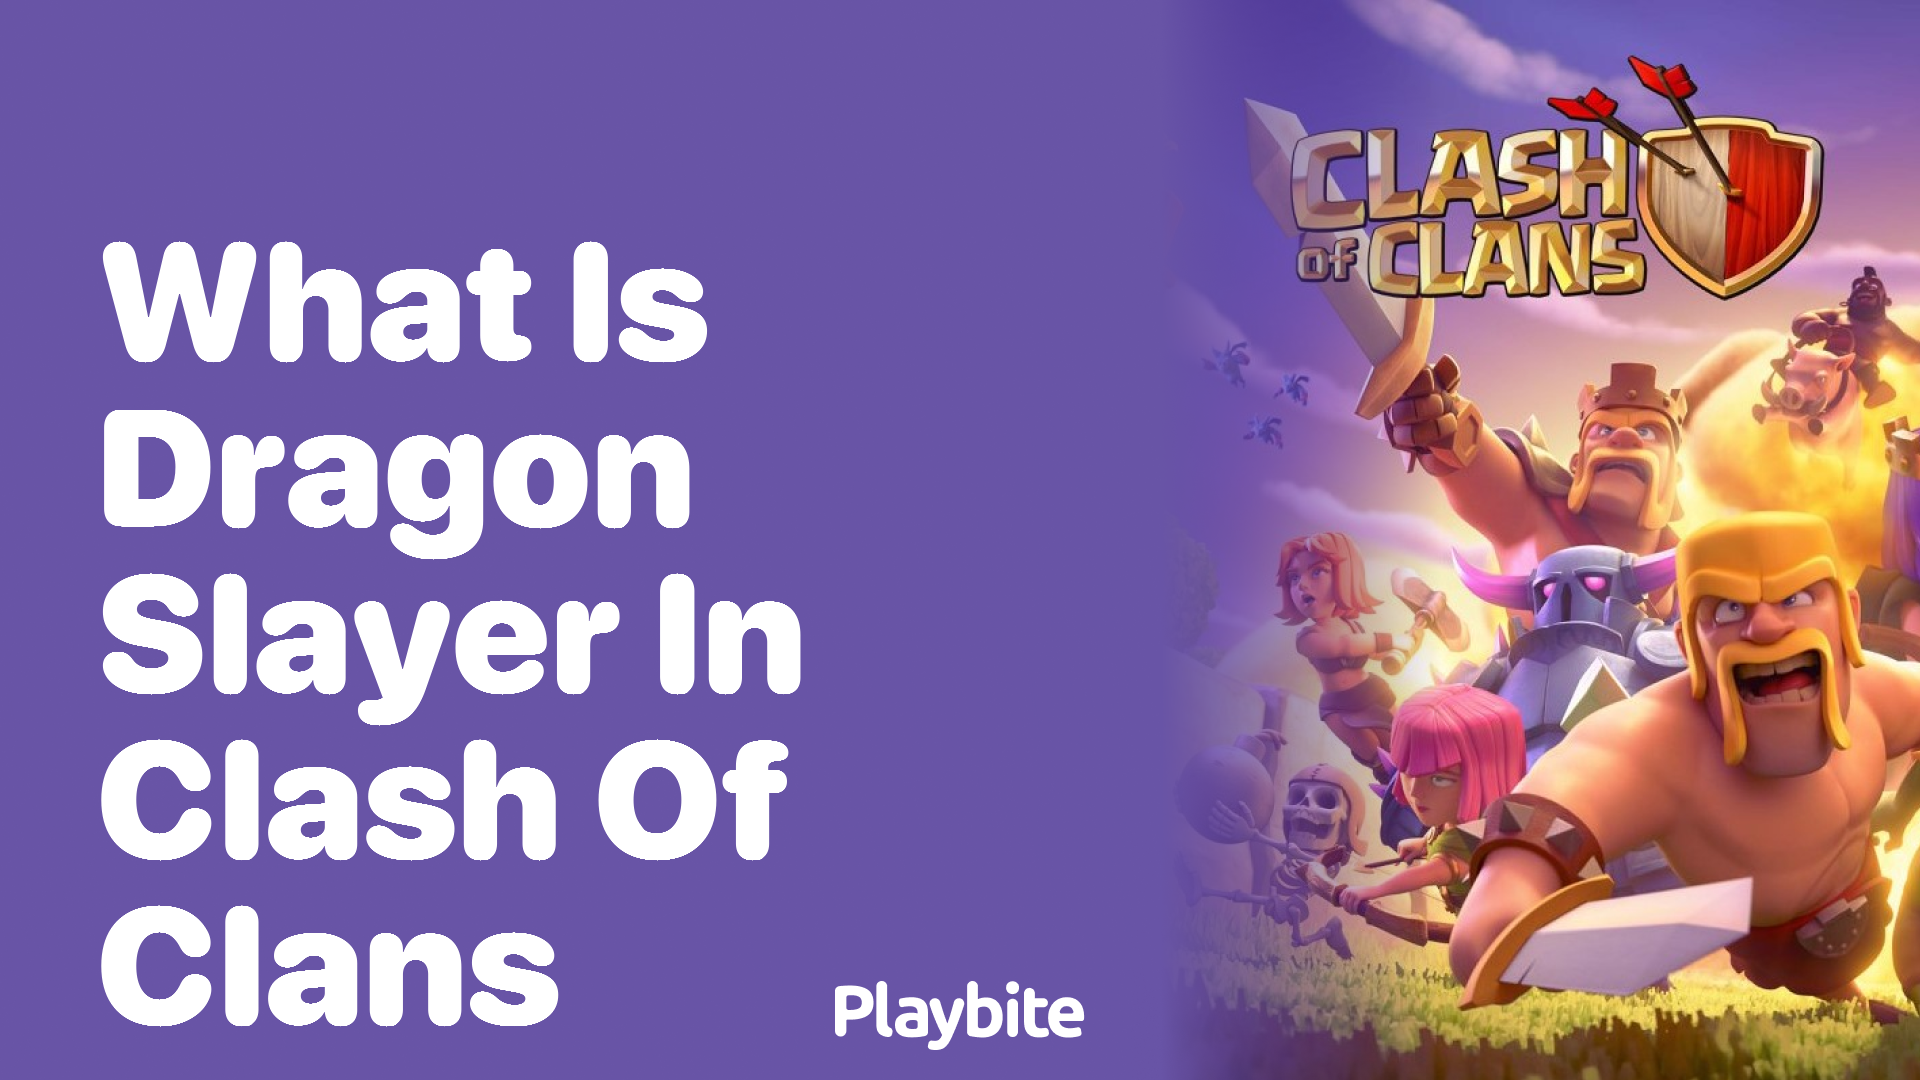 What Is Dragon Slayer in Clash of Clans?